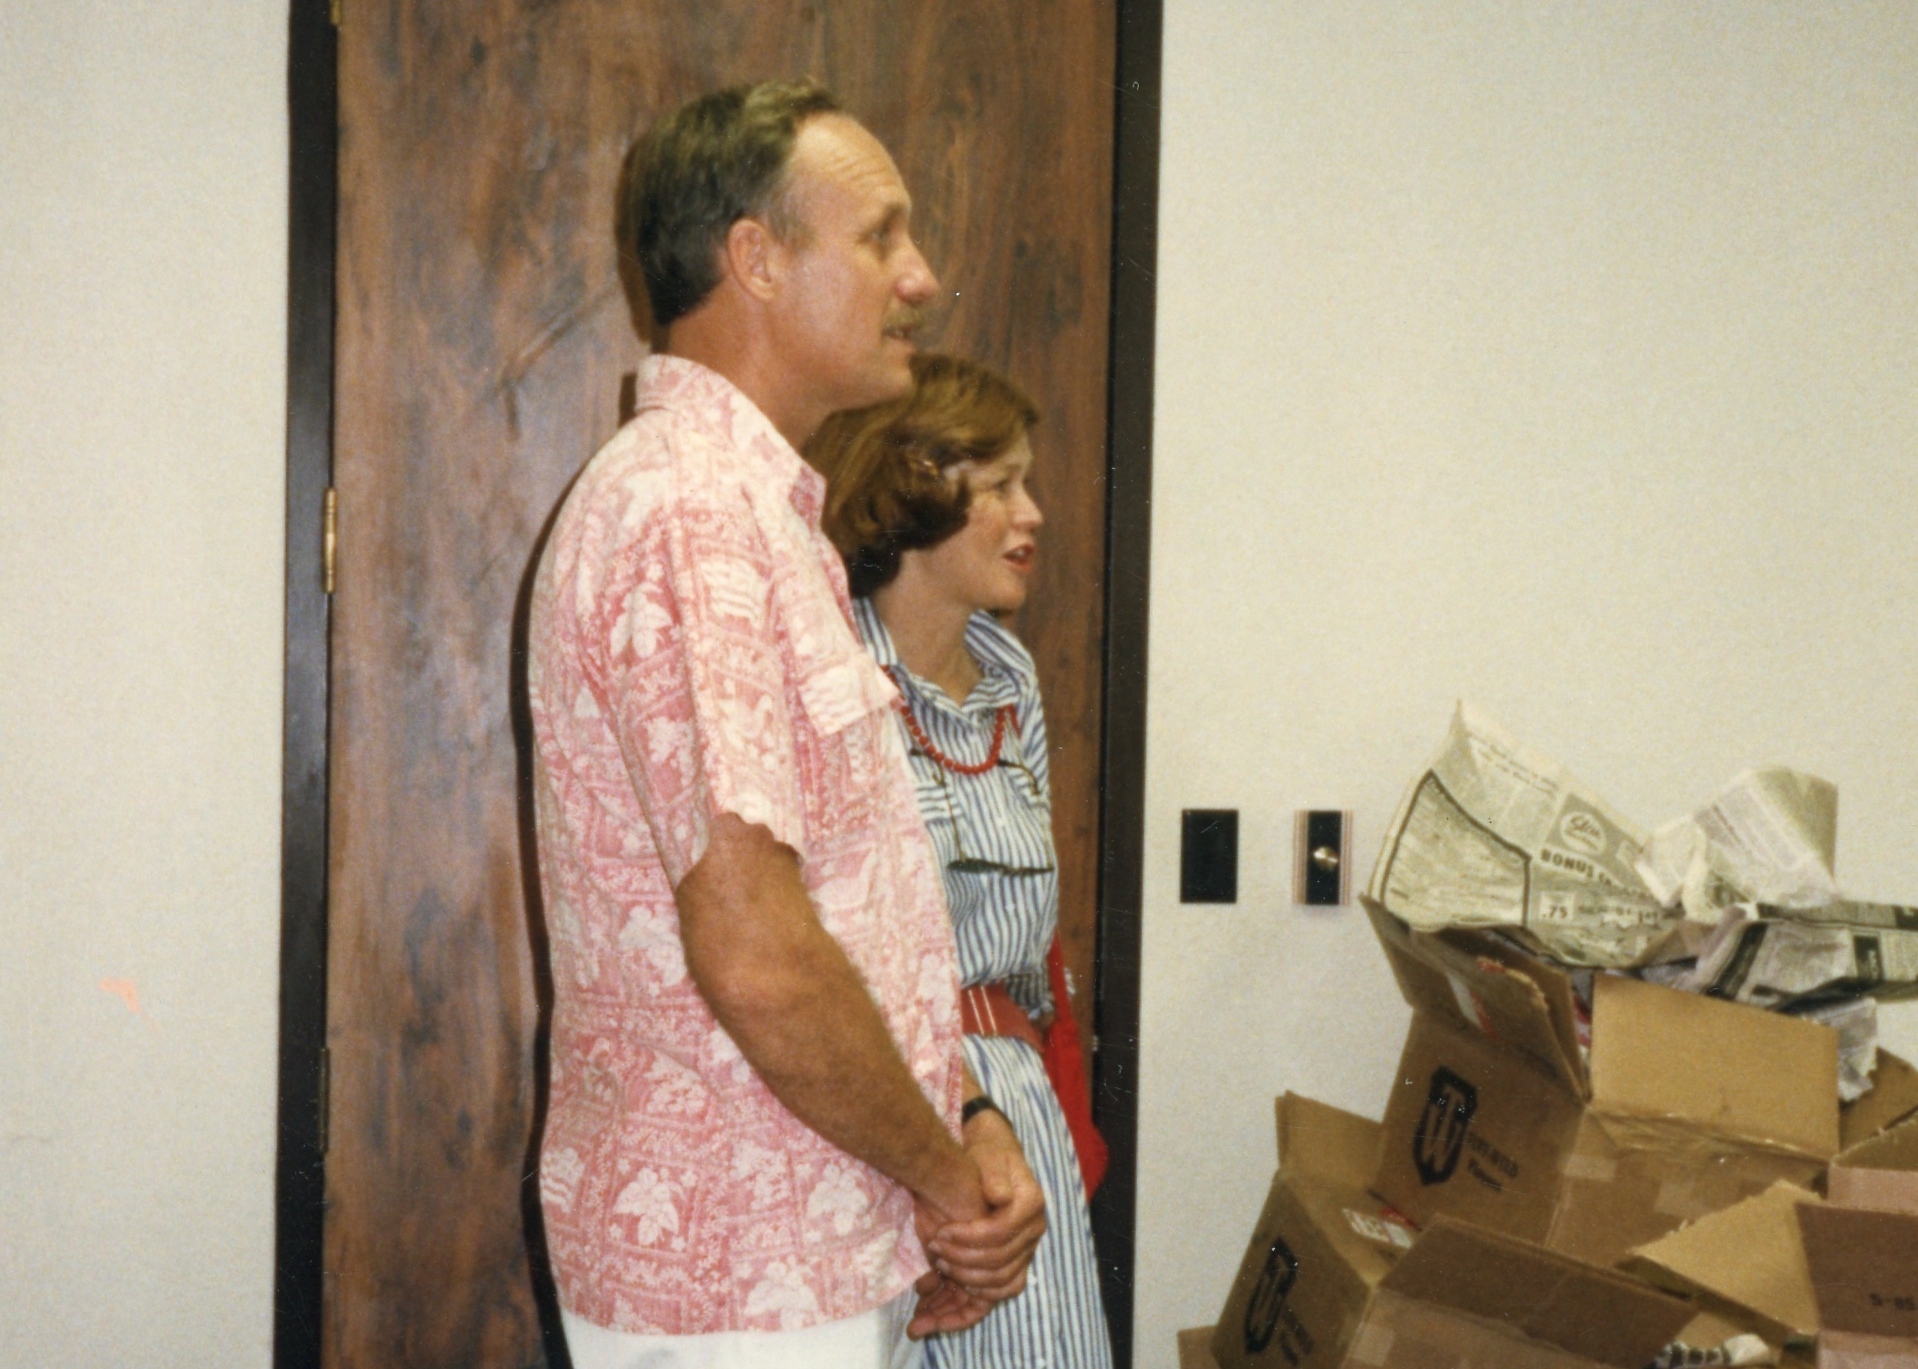  Ironman founder John Collins and his wife visit Ironman headquarters in Kona, 1985. 